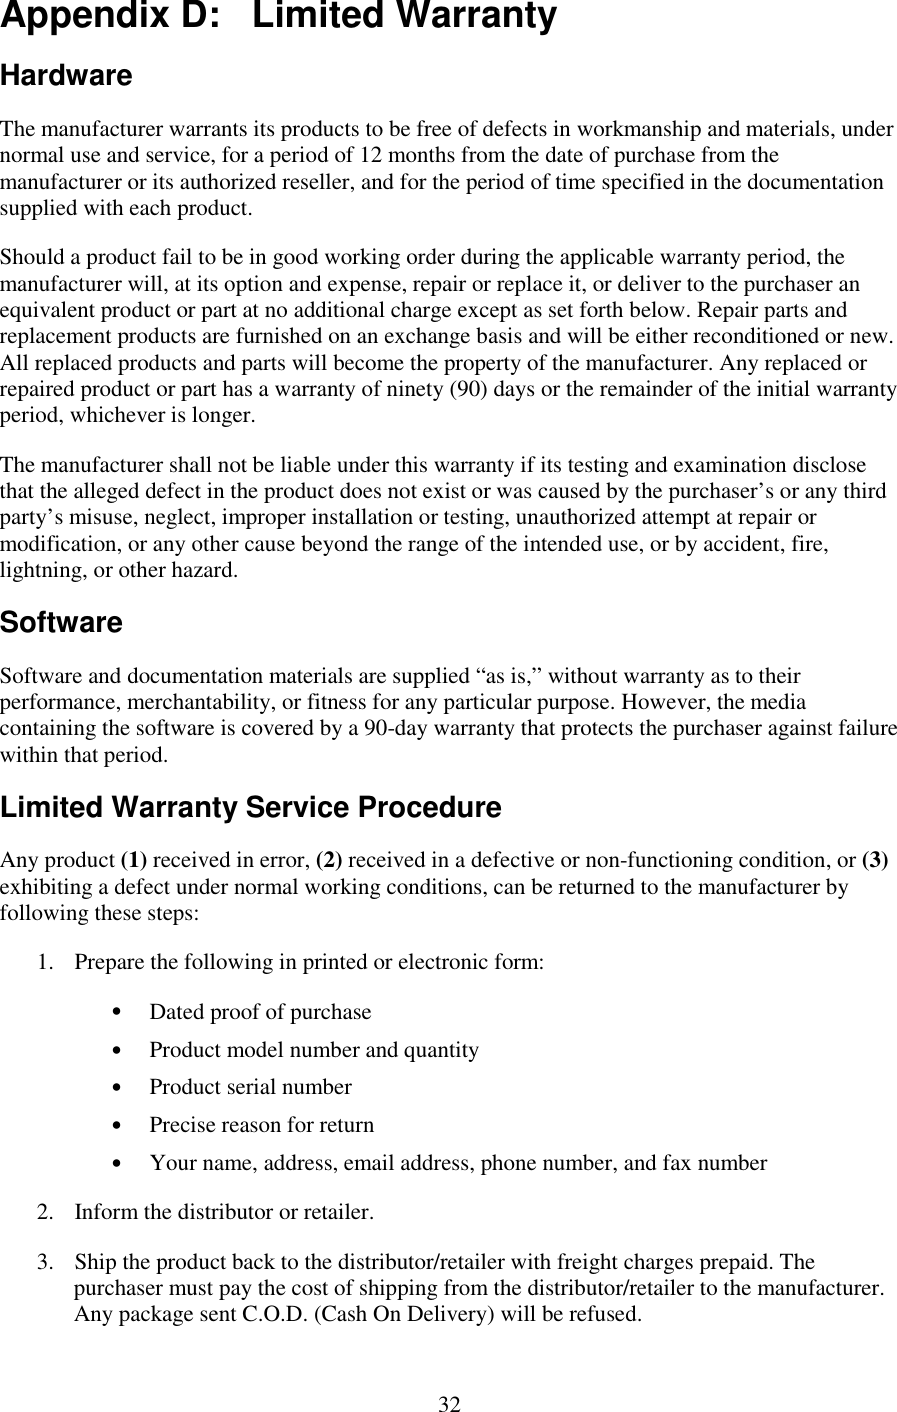   32 Appendix D:   Limited Warranty Hardware The manufacturer warrants its products to be free of defects in workmanship and materials, under normal use and service, for a period of 12 months from the date of purchase from the manufacturer or its authorized reseller, and for the period of time specified in the documentation supplied with each product. Should a product fail to be in good working order during the applicable warranty period, the manufacturer will, at its option and expense, repair or replace it, or deliver to the purchaser an equivalent product or part at no additional charge except as set forth below. Repair parts and replacement products are furnished on an exchange basis and will be either reconditioned or new. All replaced products and parts will become the property of the manufacturer. Any replaced or repaired product or part has a warranty of ninety (90) days or the remainder of the initial warranty period, whichever is longer. The manufacturer shall not be liable under this warranty if its testing and examination disclose that the alleged defect in the product does not exist or was caused by the purchaser’s or any third party’s misuse, neglect, improper installation or testing, unauthorized attempt at repair or modification, or any other cause beyond the range of the intended use, or by accident, fire, lightning, or other hazard. Software Software and documentation materials are supplied “as is,” without warranty as to their performance, merchantability, or fitness for any particular purpose. However, the media containing the software is covered by a 90-day warranty that protects the purchaser against failure within that period. Limited Warranty Service Procedure Any product (1) received in error, (2) received in a defective or non-functioning condition, or (3) exhibiting a defect under normal working conditions, can be returned to the manufacturer by following these steps: 1.  Prepare the following in printed or electronic form: •  Dated proof of purchase •  Product model number and quantity •  Product serial number •  Precise reason for return •  Your name, address, email address, phone number, and fax number 2.  Inform the distributor or retailer. 3.  Ship the product back to the distributor/retailer with freight charges prepaid. The purchaser must pay the cost of shipping from the distributor/retailer to the manufacturer. Any package sent C.O.D. (Cash On Delivery) will be refused. 